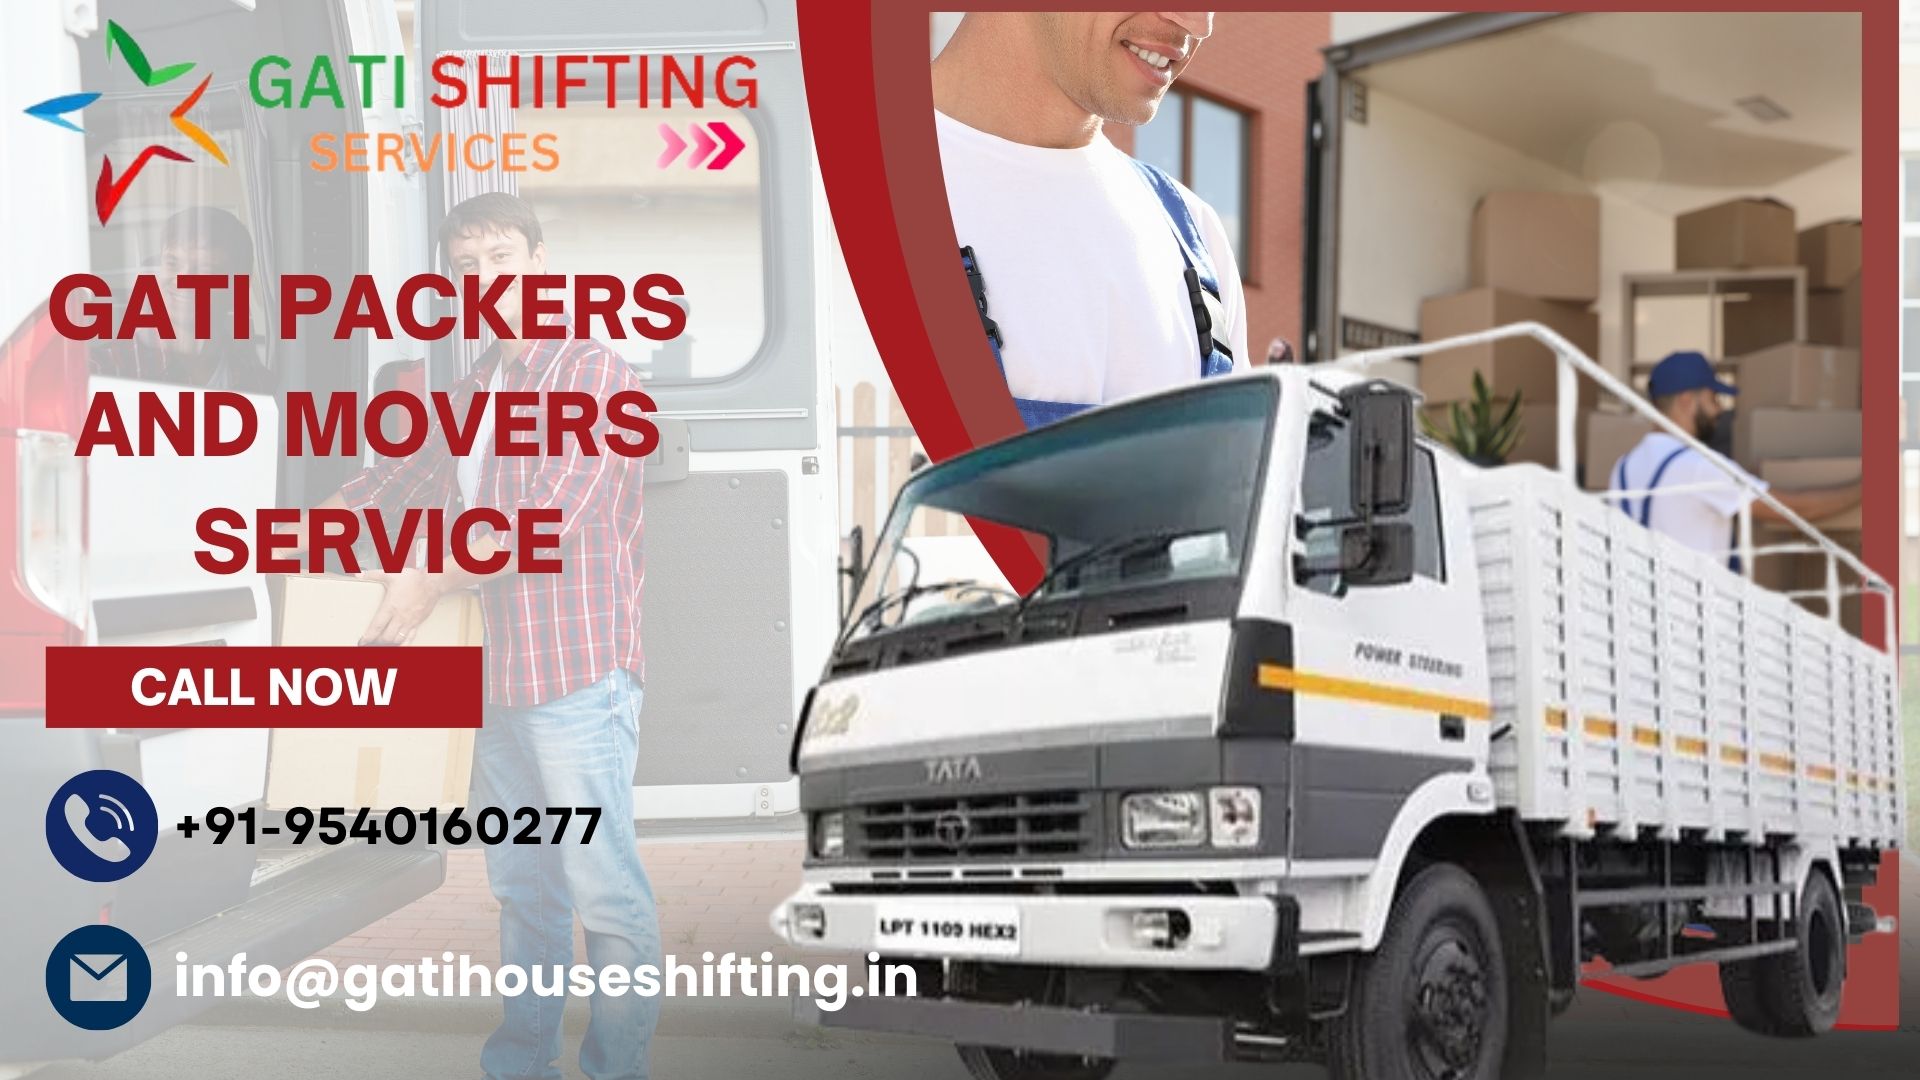 Best Gati Packers and Movers in Panchkula Call 9540160277